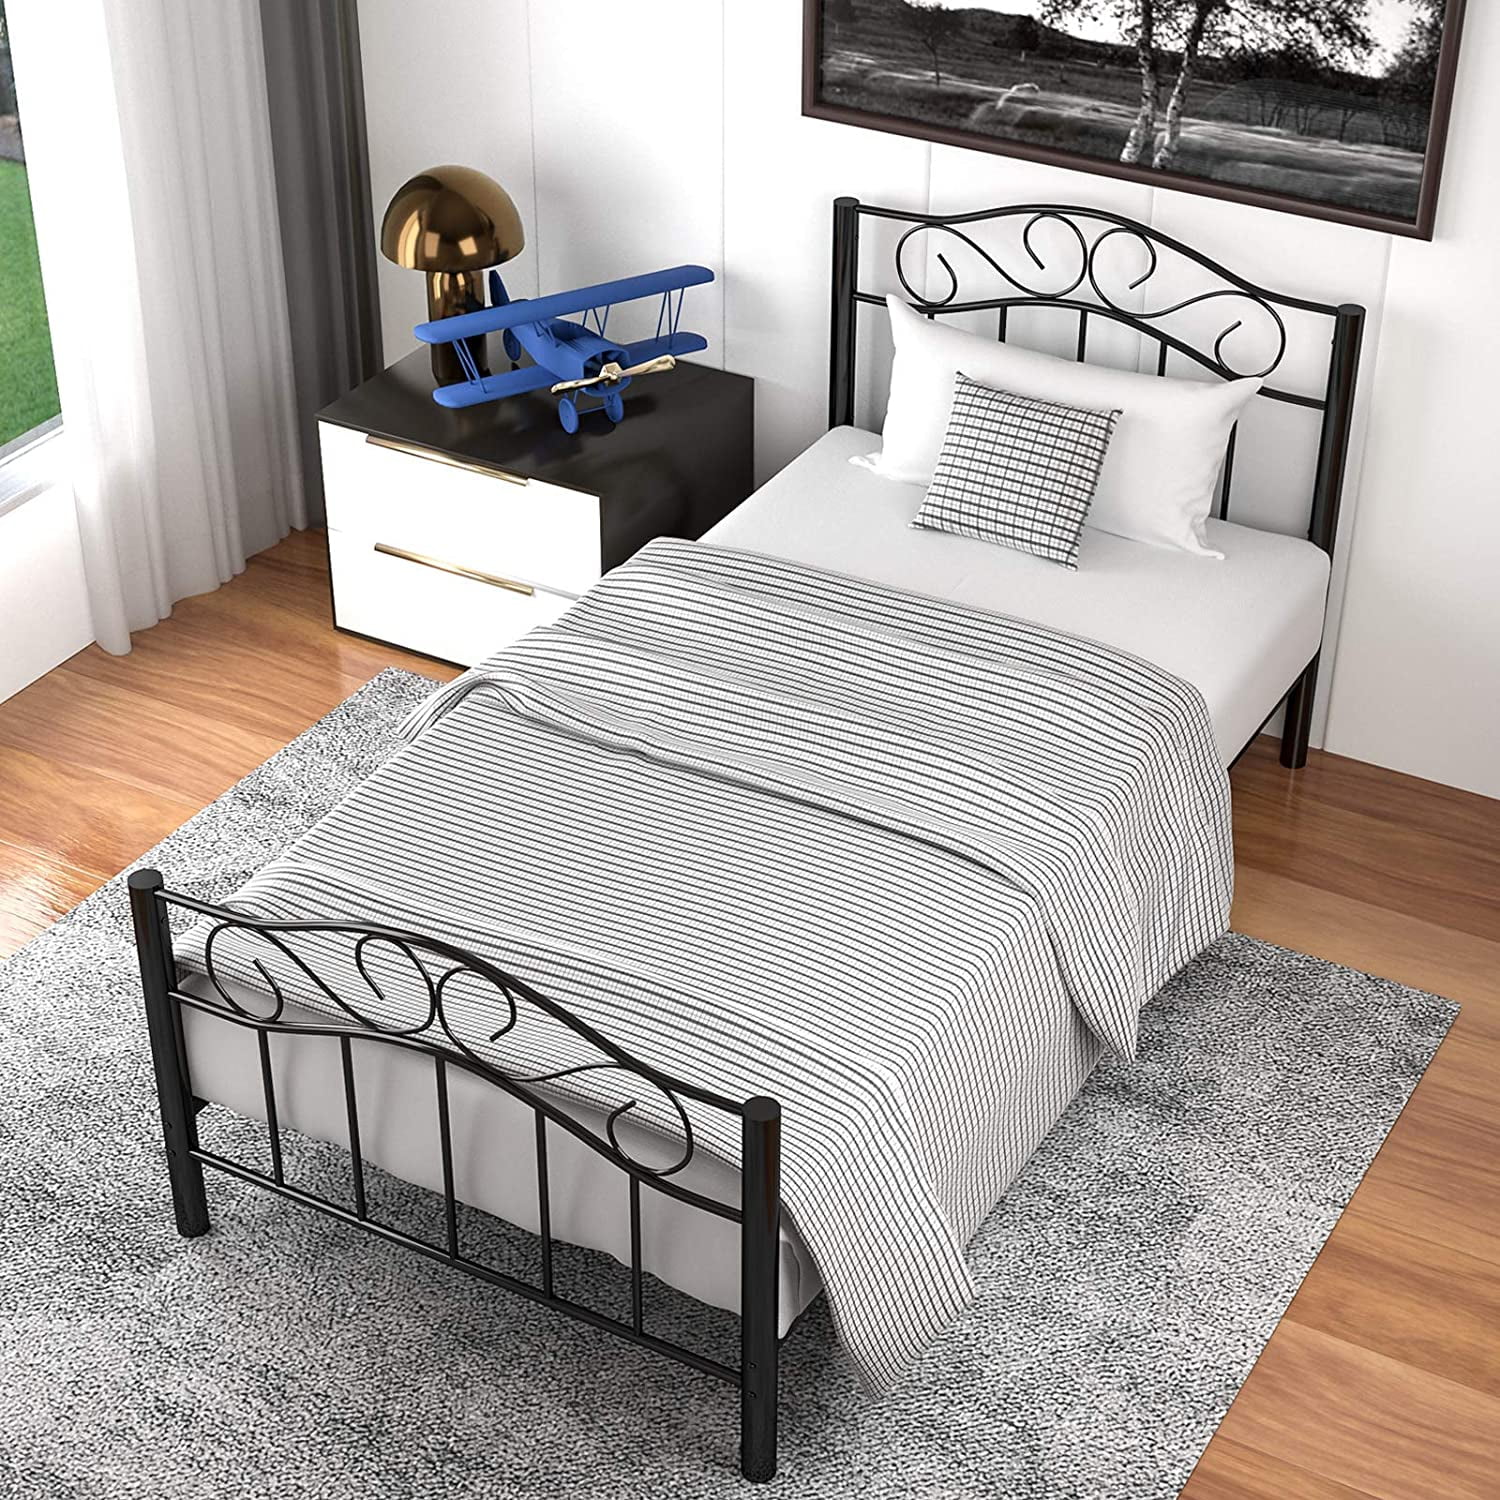 Mecor Twin Xl Curved Metal Bed Frame, Twin Metal Bed Frame Headboard Footboard